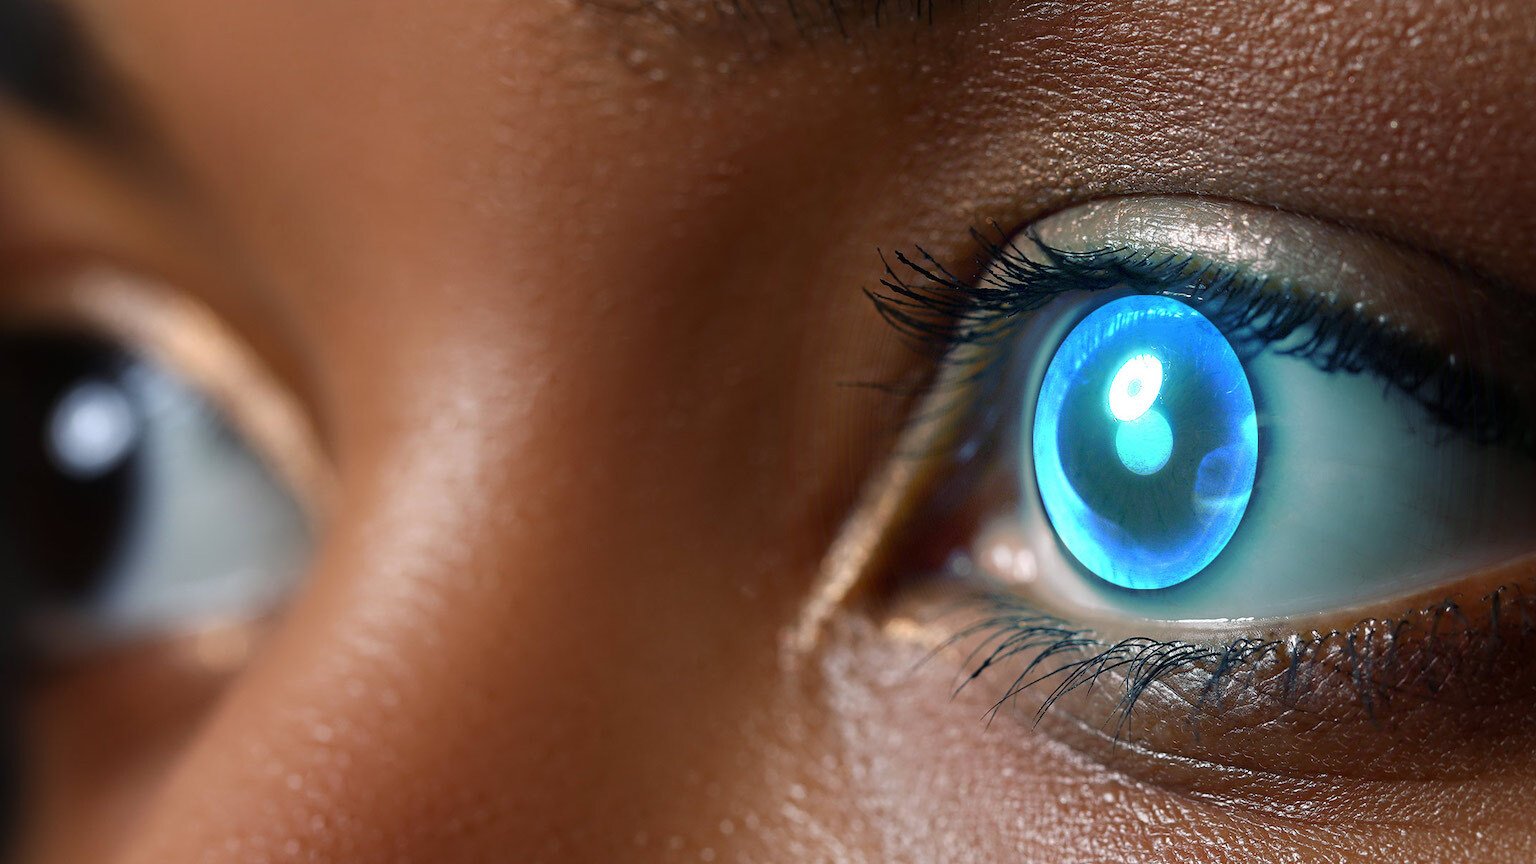 These augmented reality contact lenses may assist us in entering the metaverse.